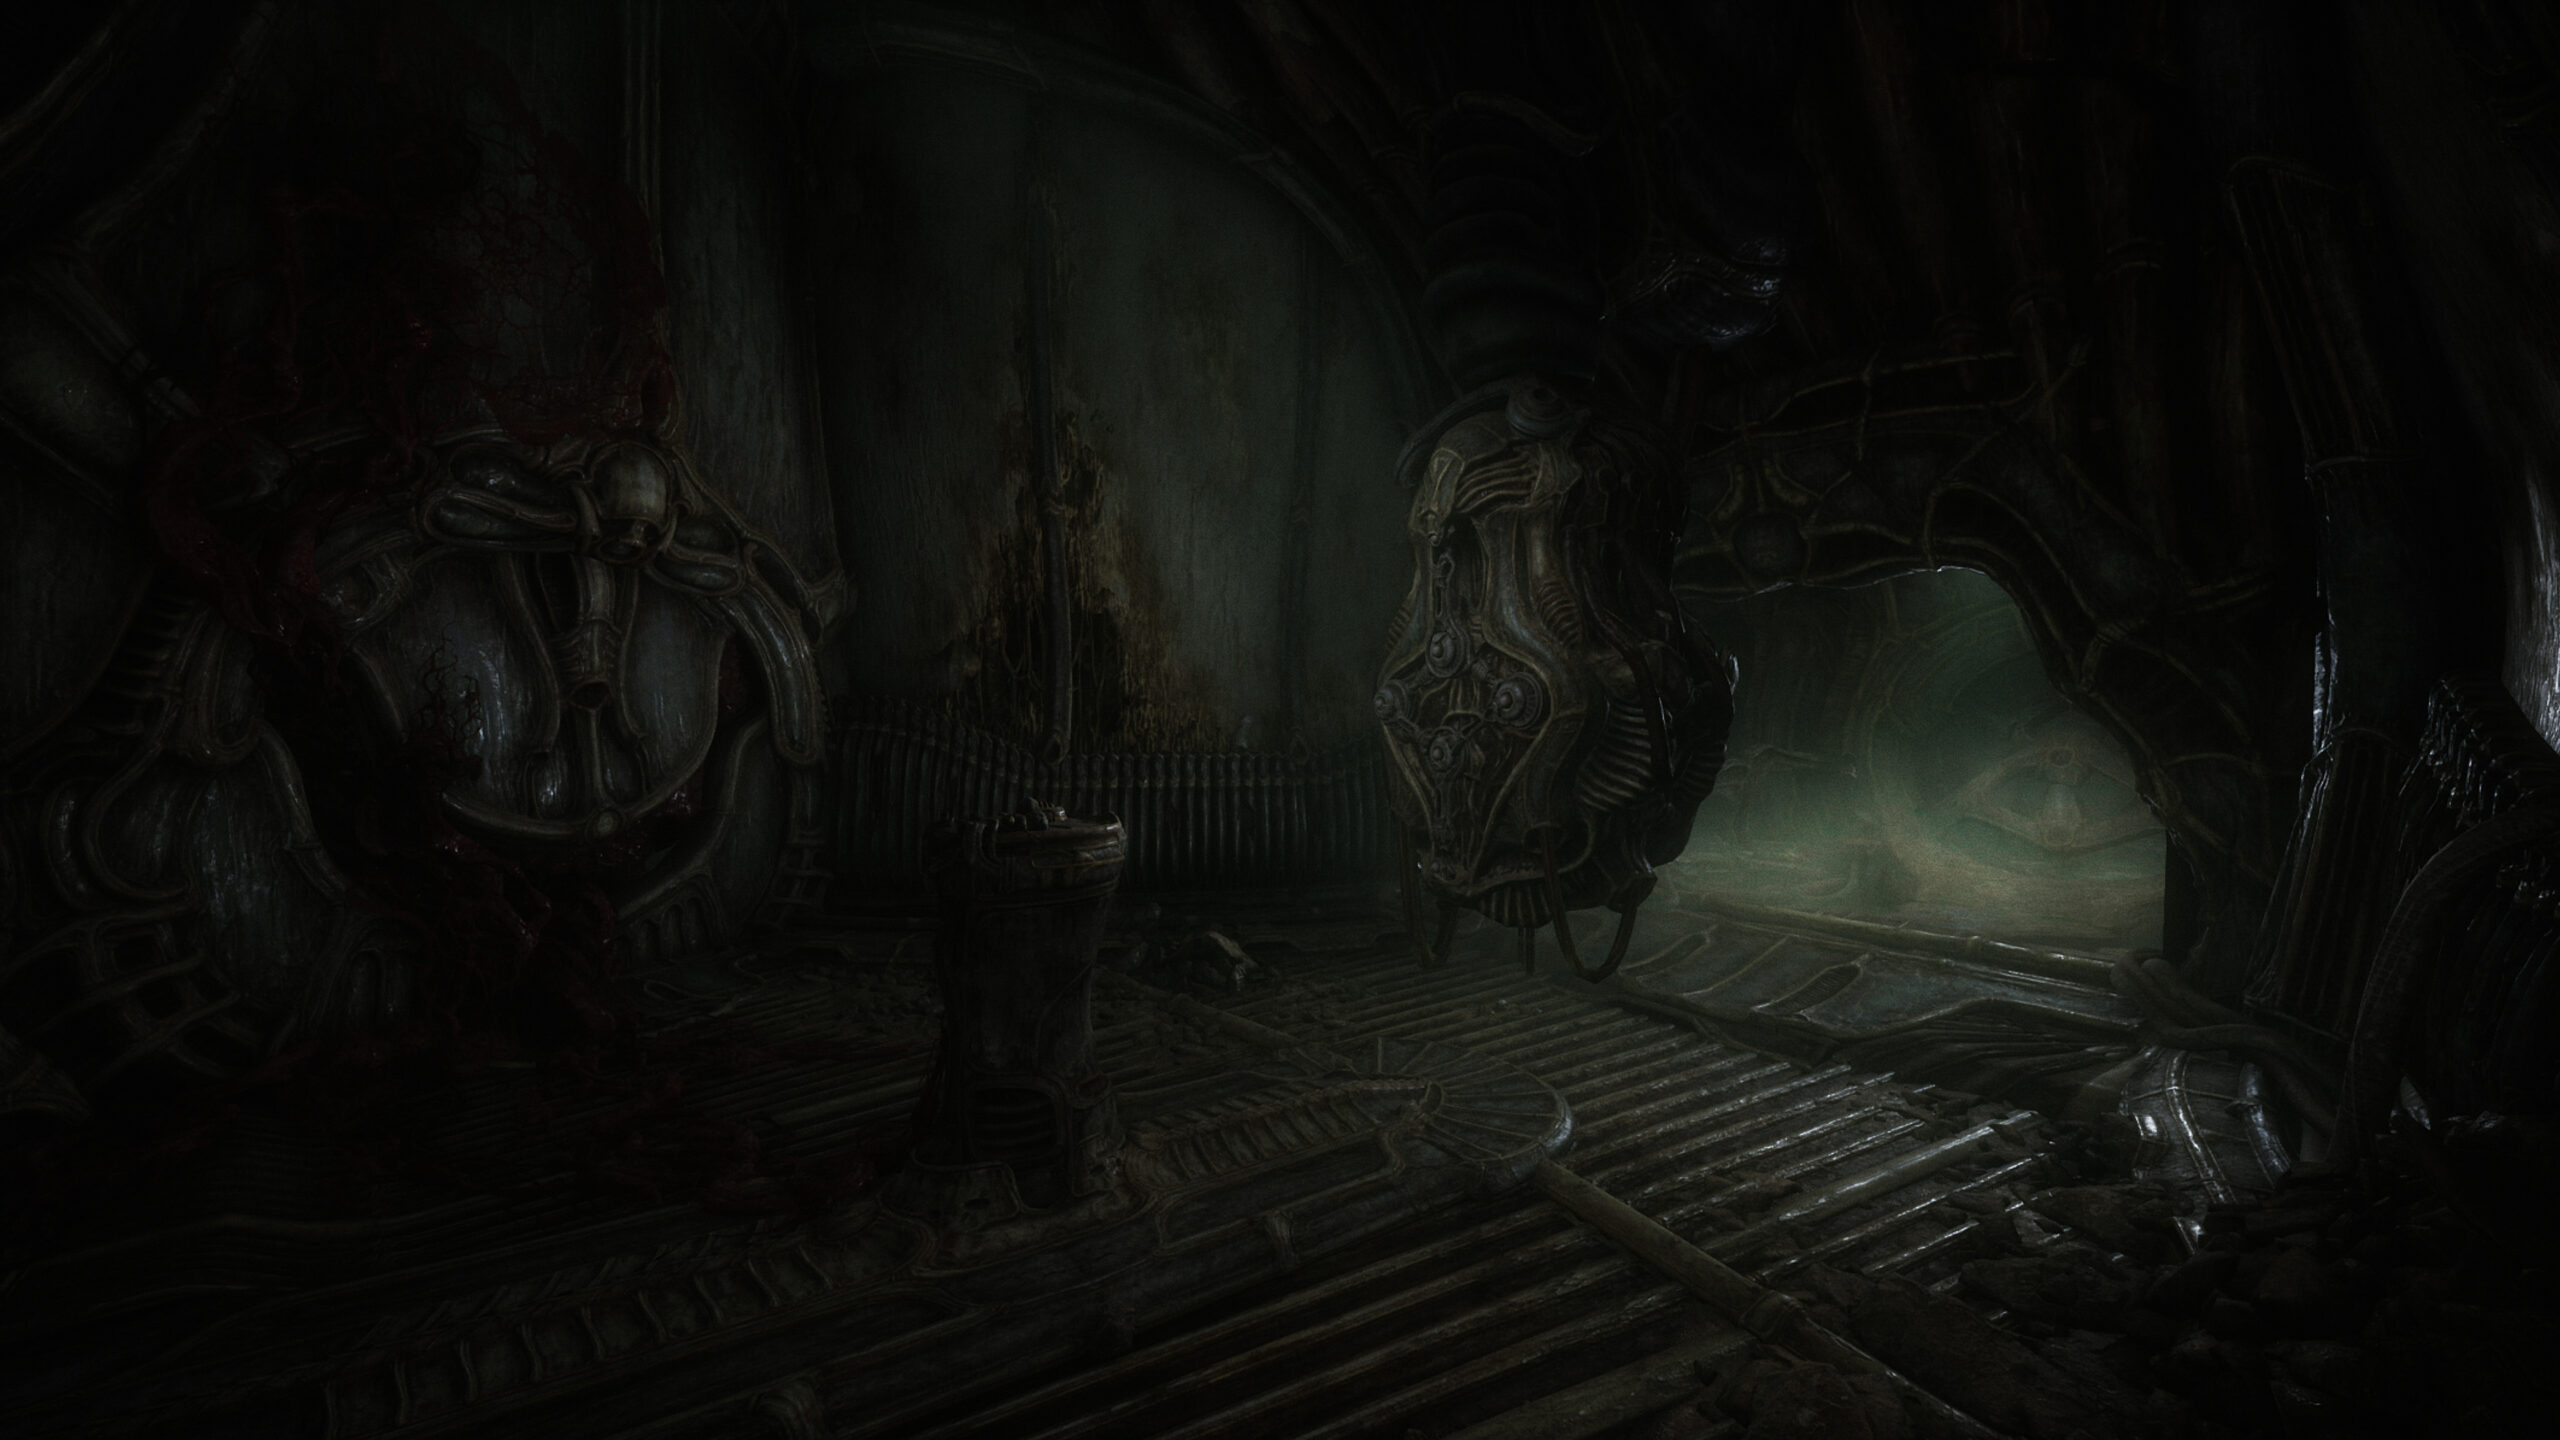 Scorn (Game): A visceral labyrinthian world, Heavily inspired by the art of H.R. Giger. 2560x1440 HD Background.